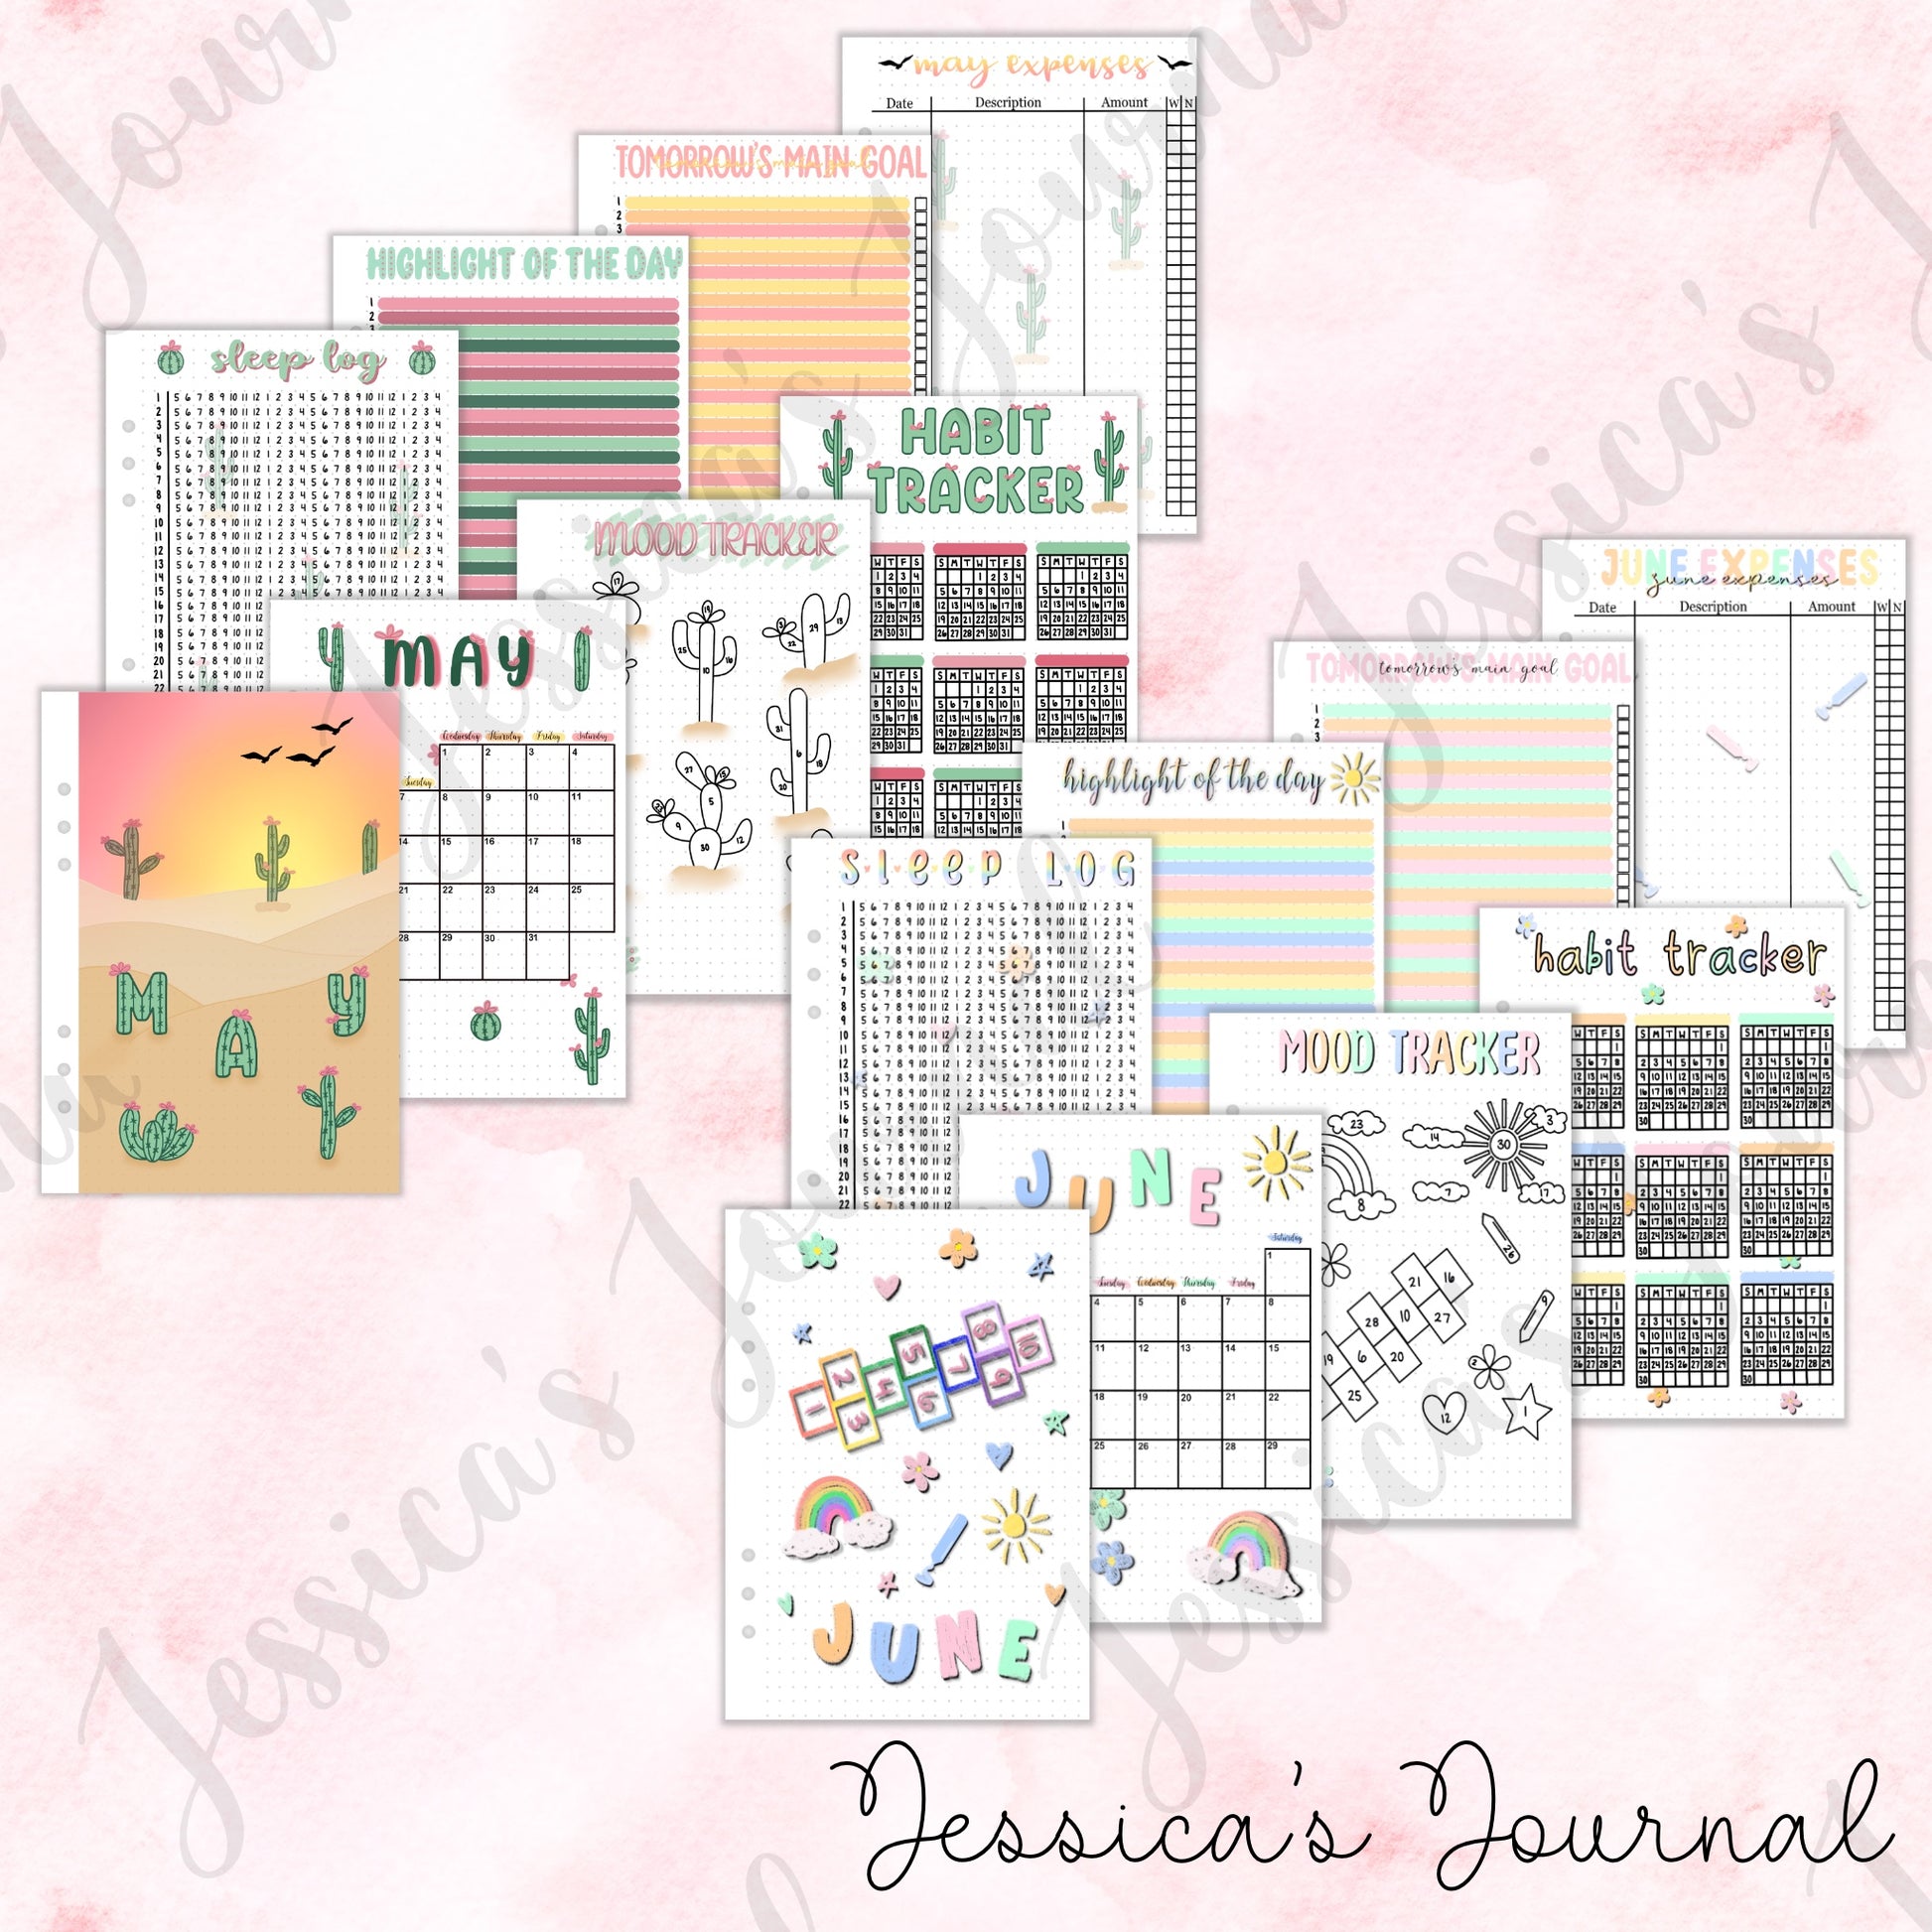 The Full Year Journal + Stationery Kit, Personalized Journal